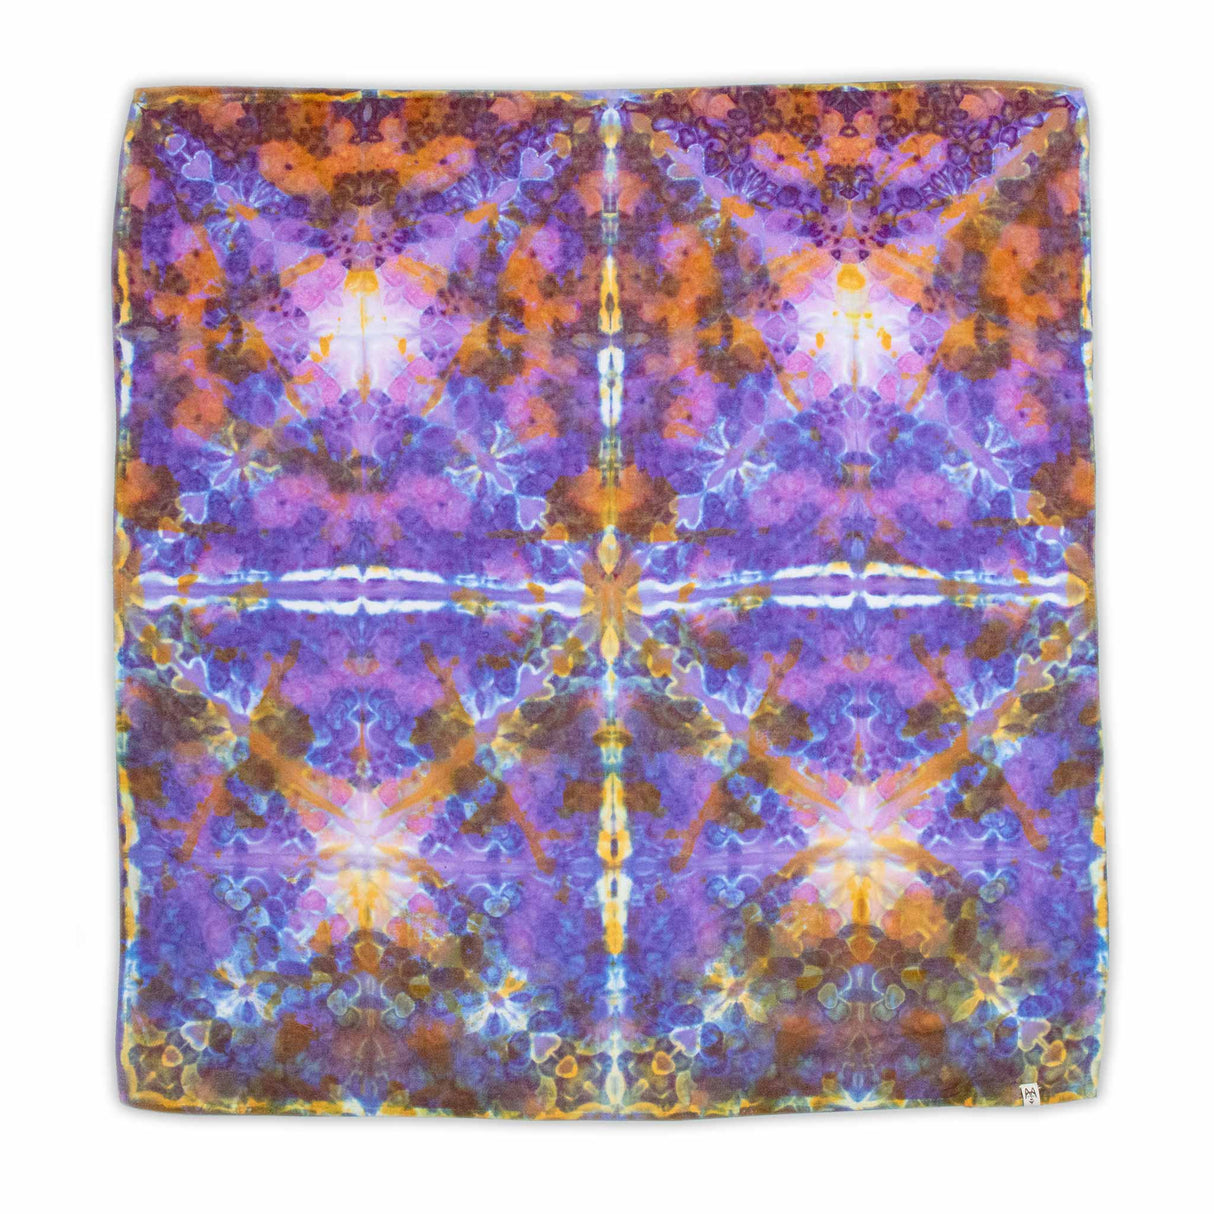 A bandana with a tie-dye design featuring symmetrical bursts of purple, orange, and yellow, creating a mirrored kaleidoscopic effect.